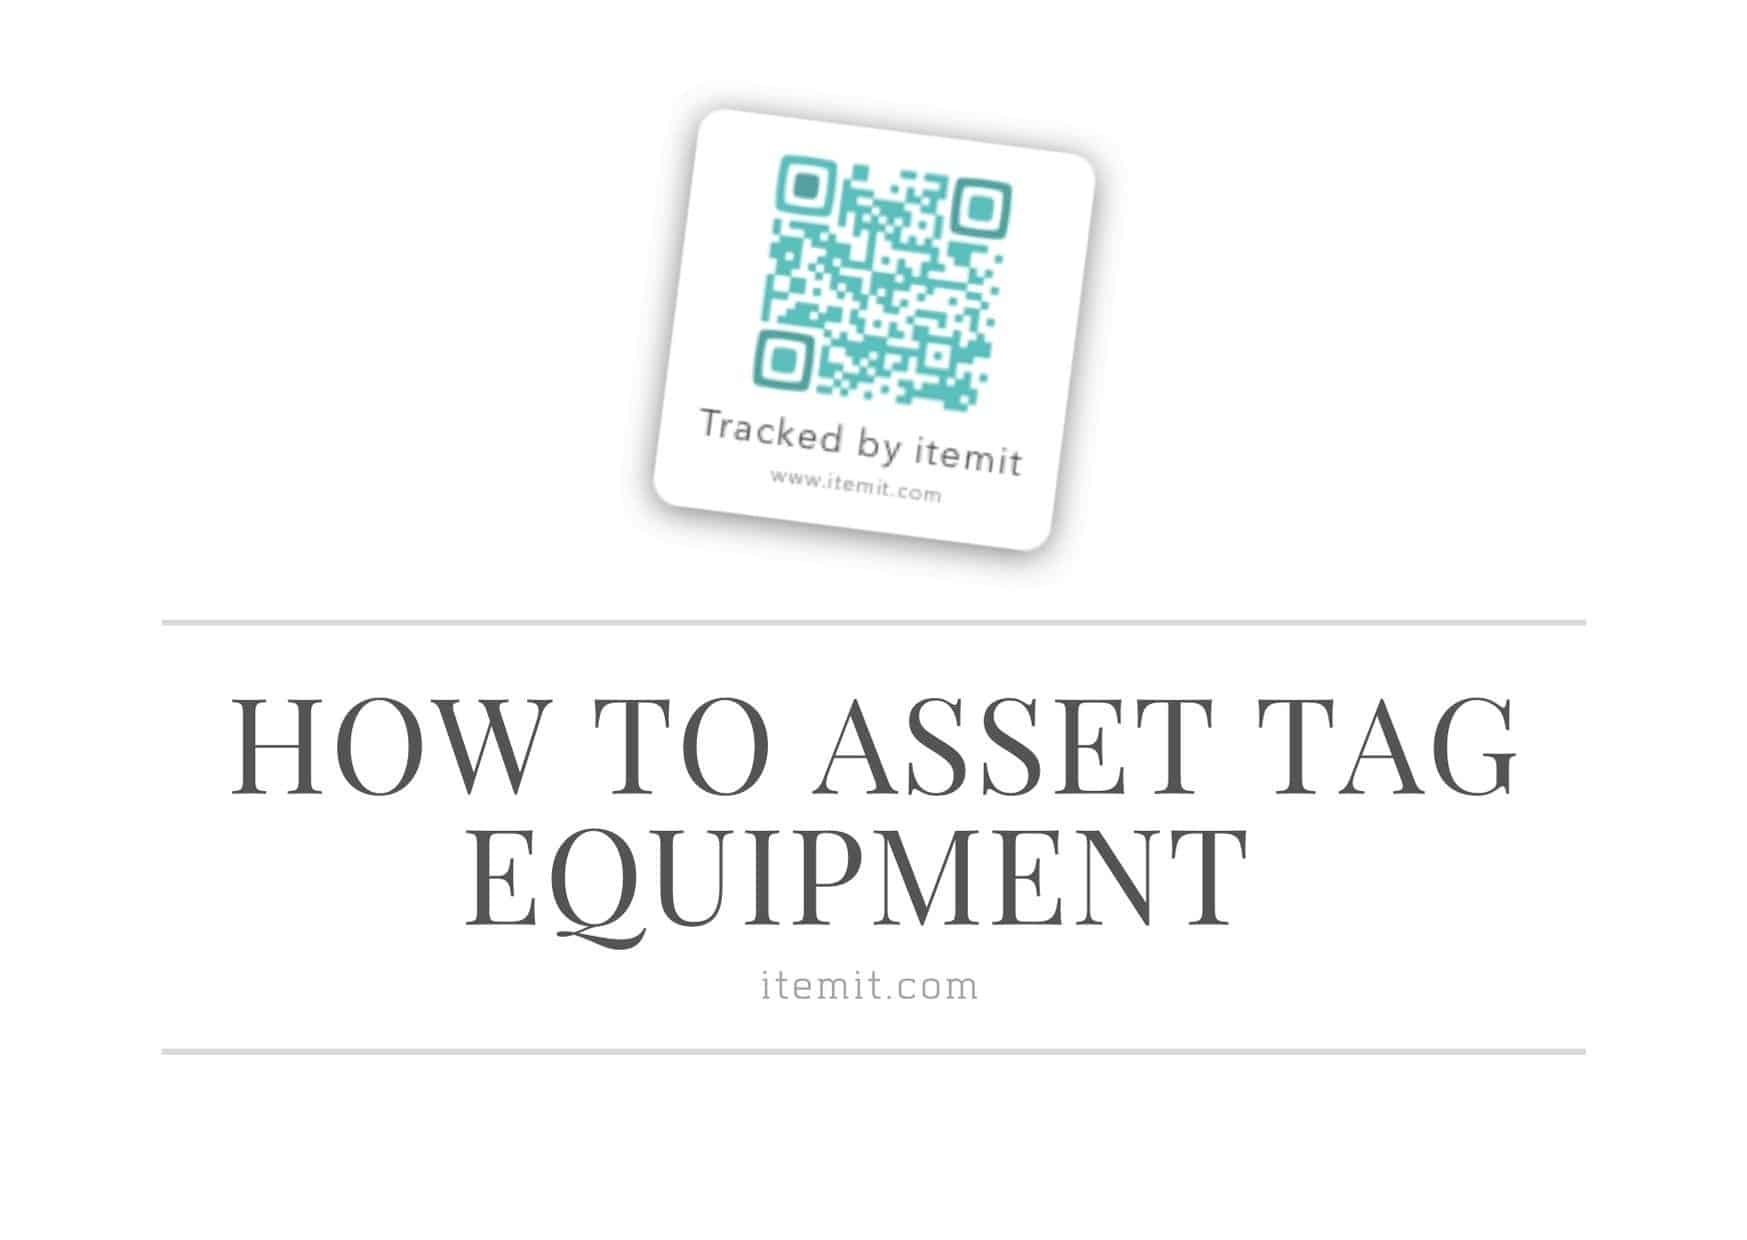 how to asset tag equipment and equipment tracking